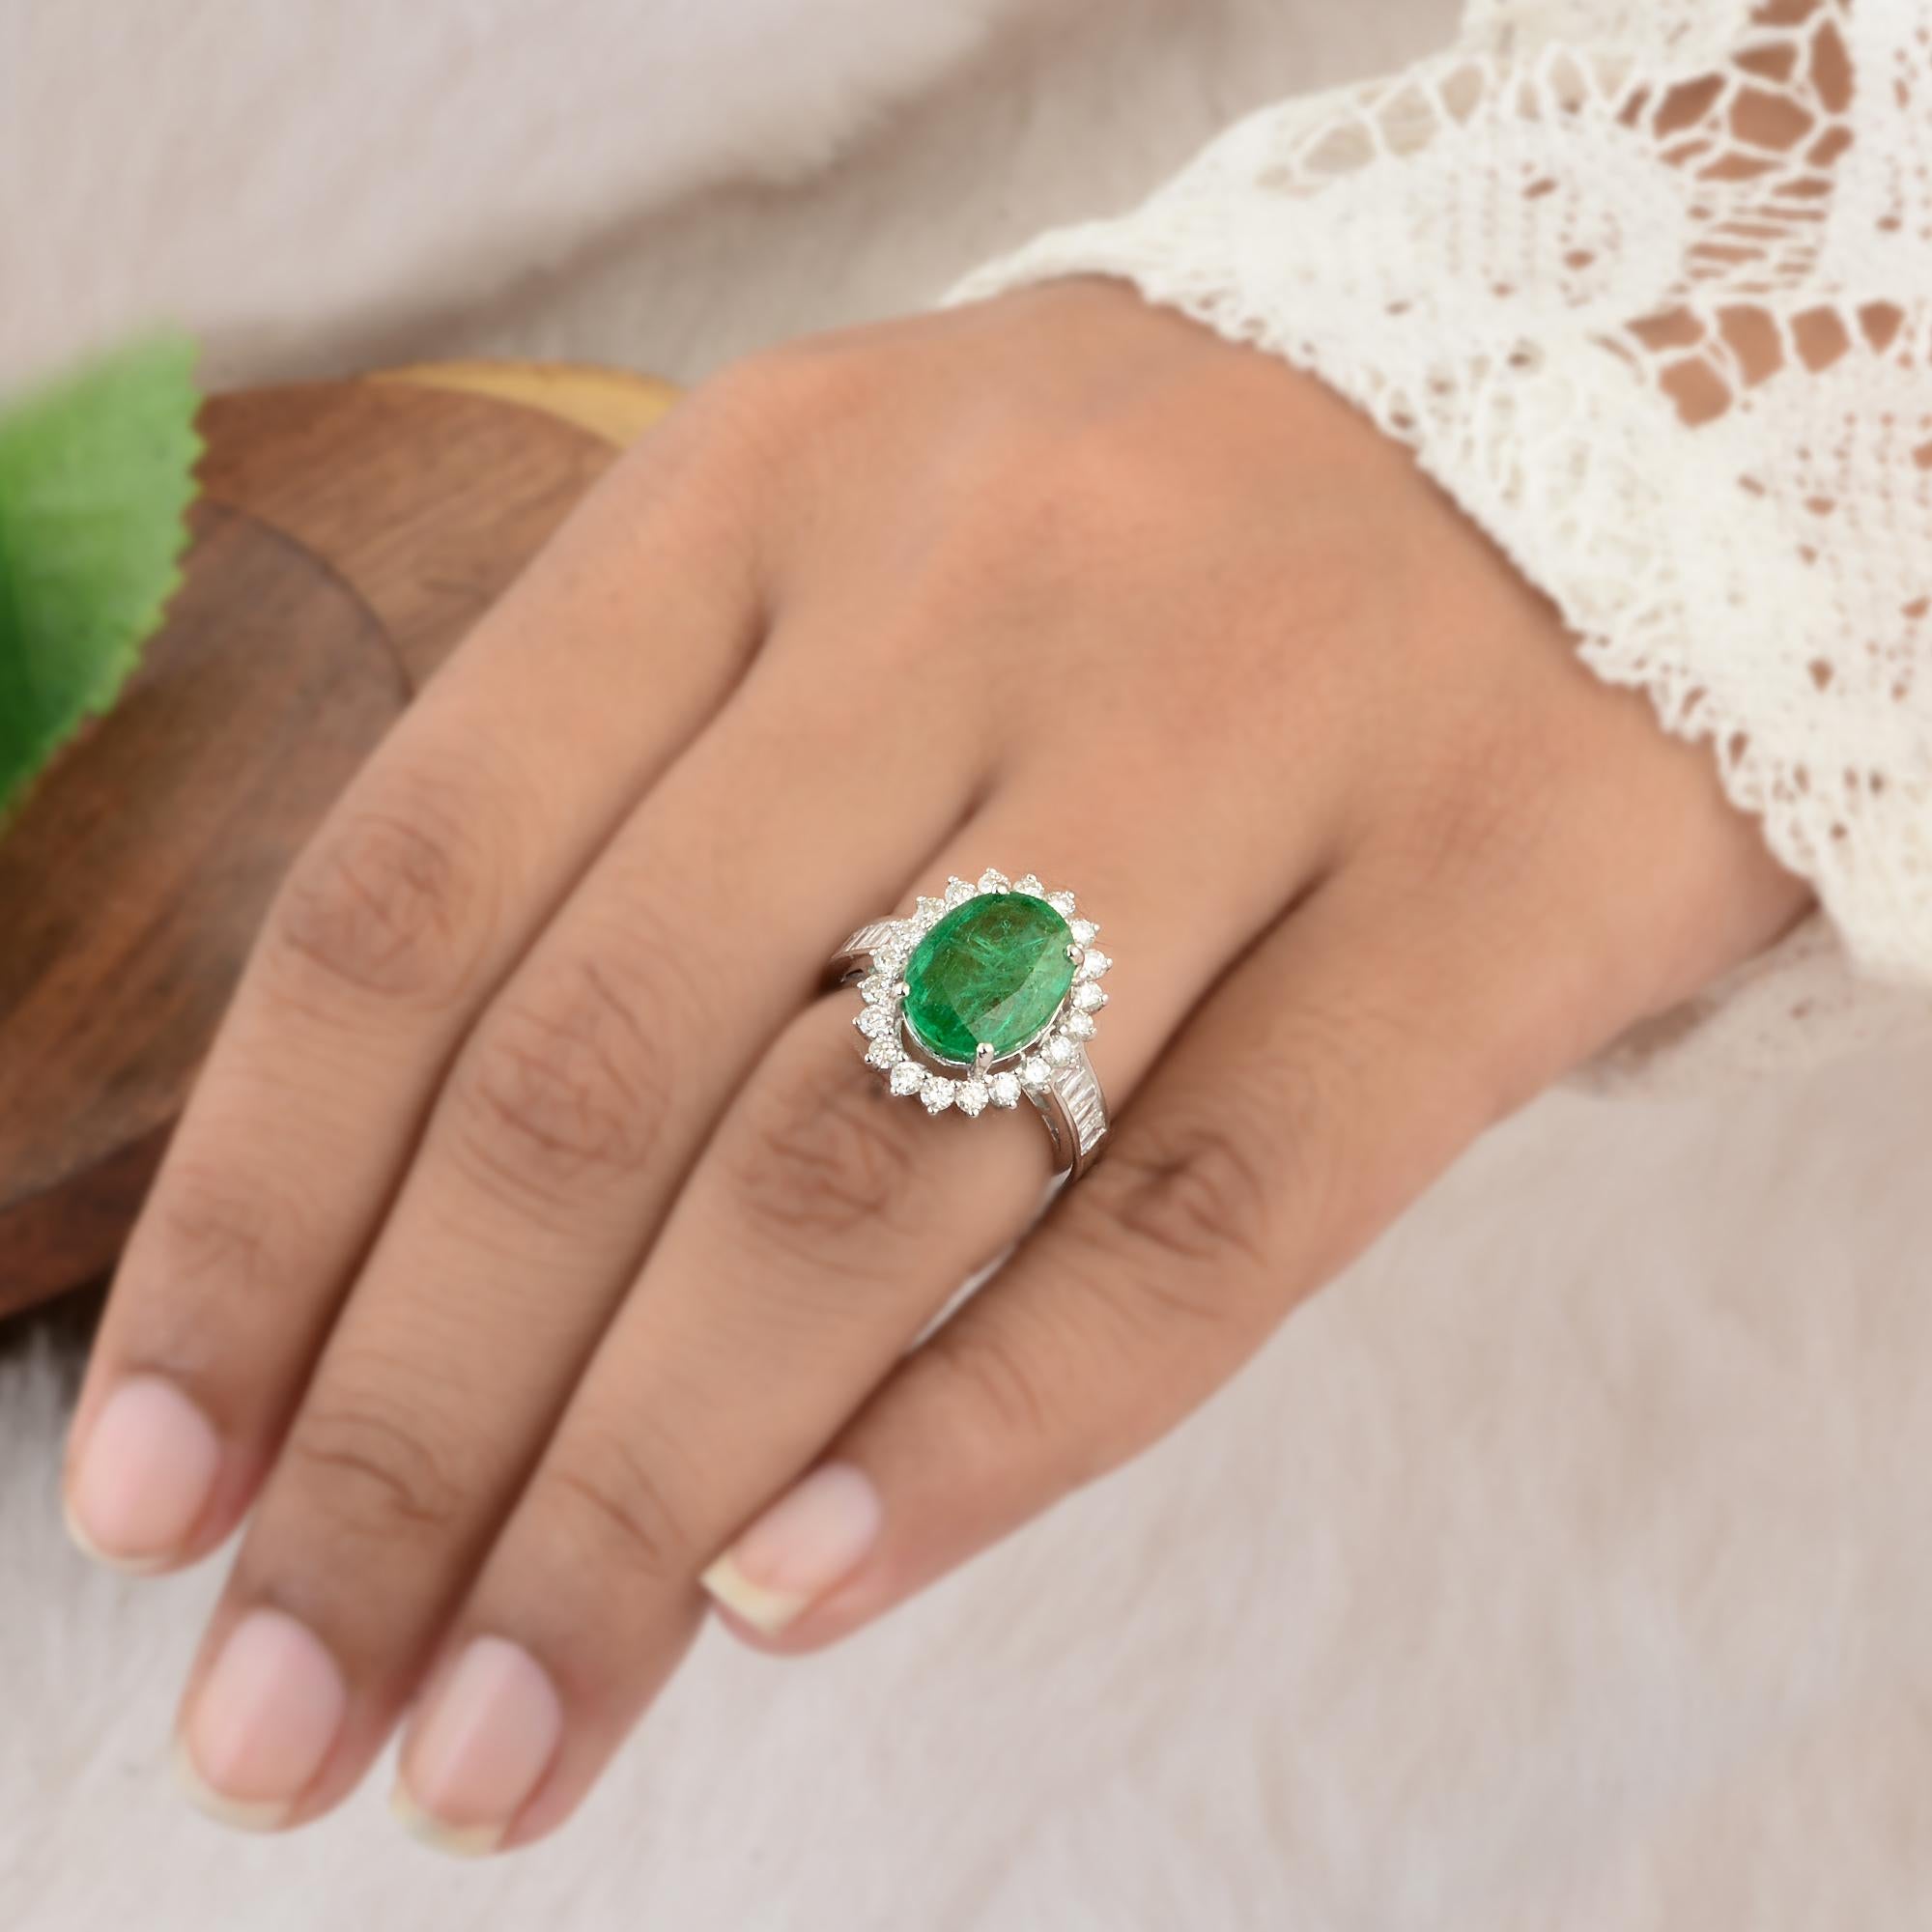 For Sale:  Oval Natural Emerald Gemstone Cocktail Ring Diamond 10 Karat White Gold Jewelry 3